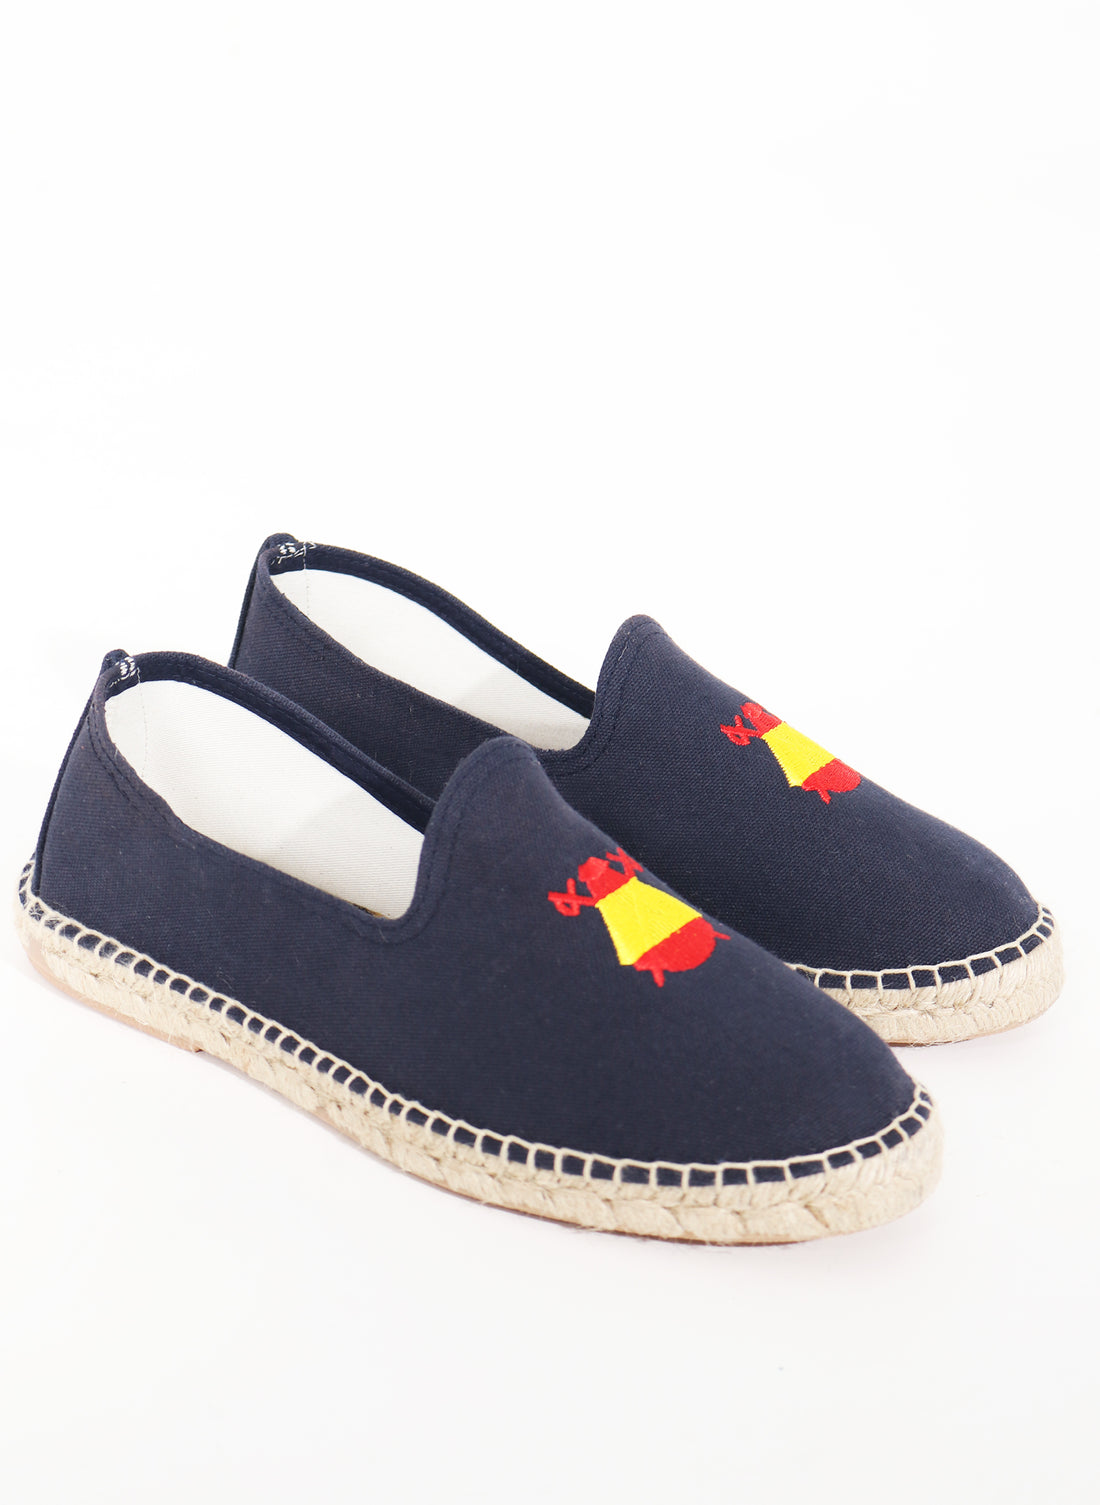 Men's Navy Blue Embroidered Capote Espadrilles Spain